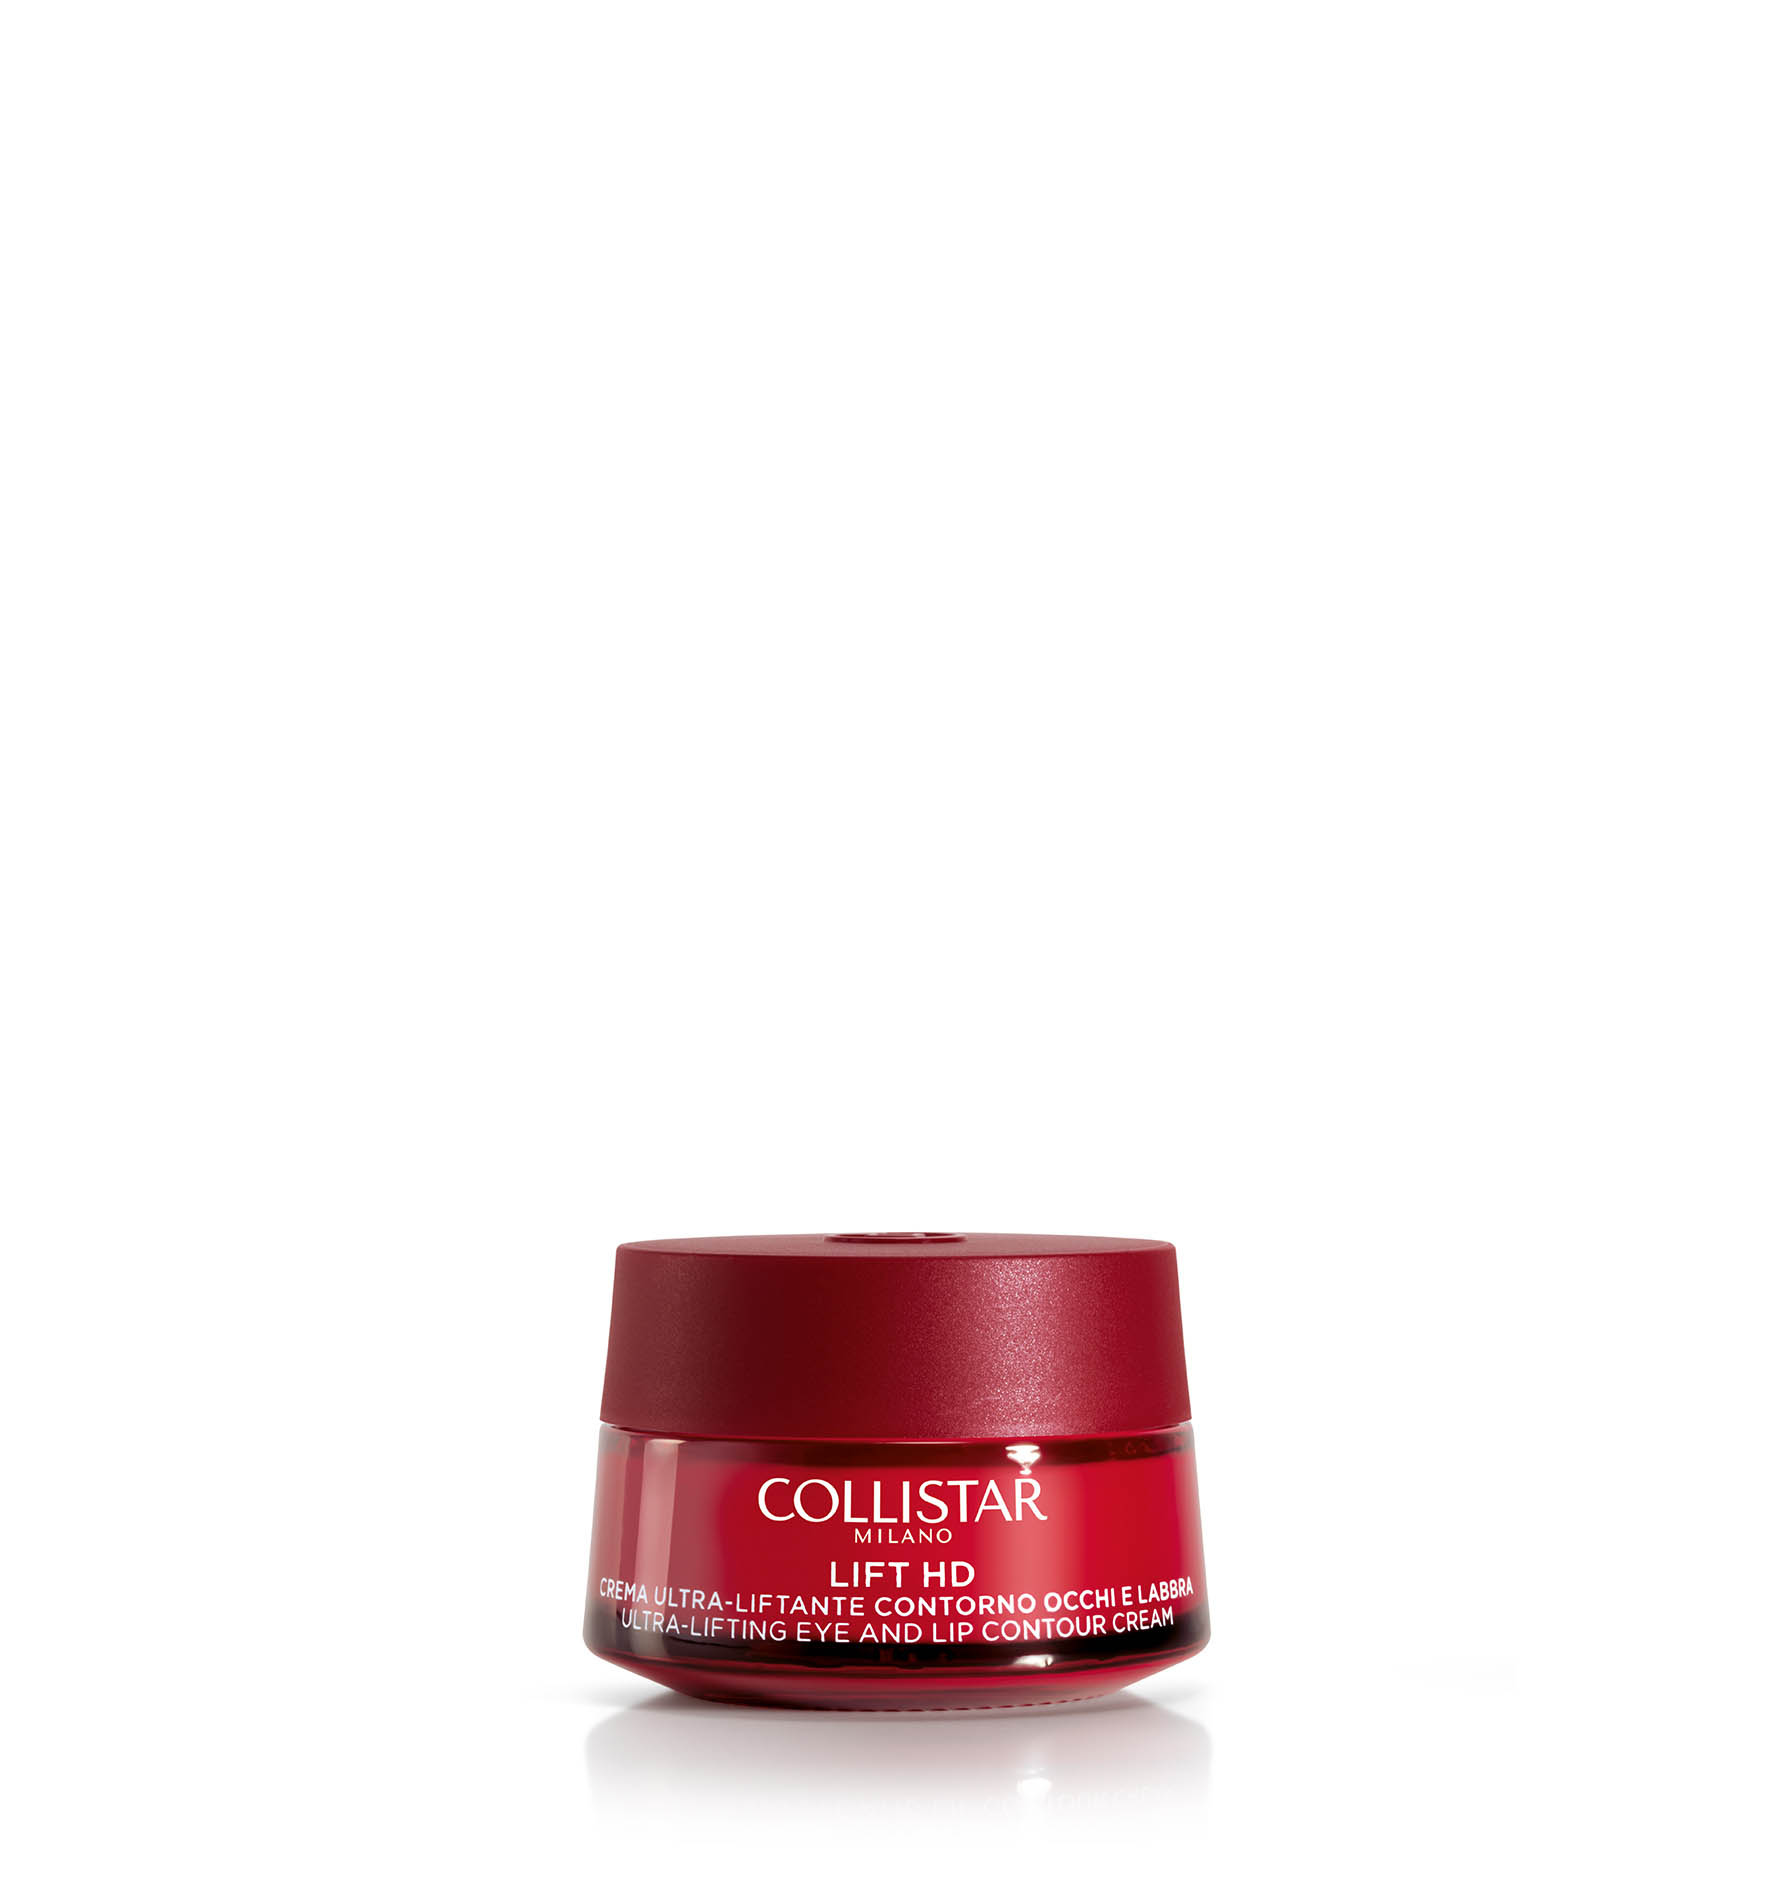 ULTRA-LIFTING EYE AND LIP CONTOUR CREAM - Dry skin | Collistar - Shop Online Ufficiale